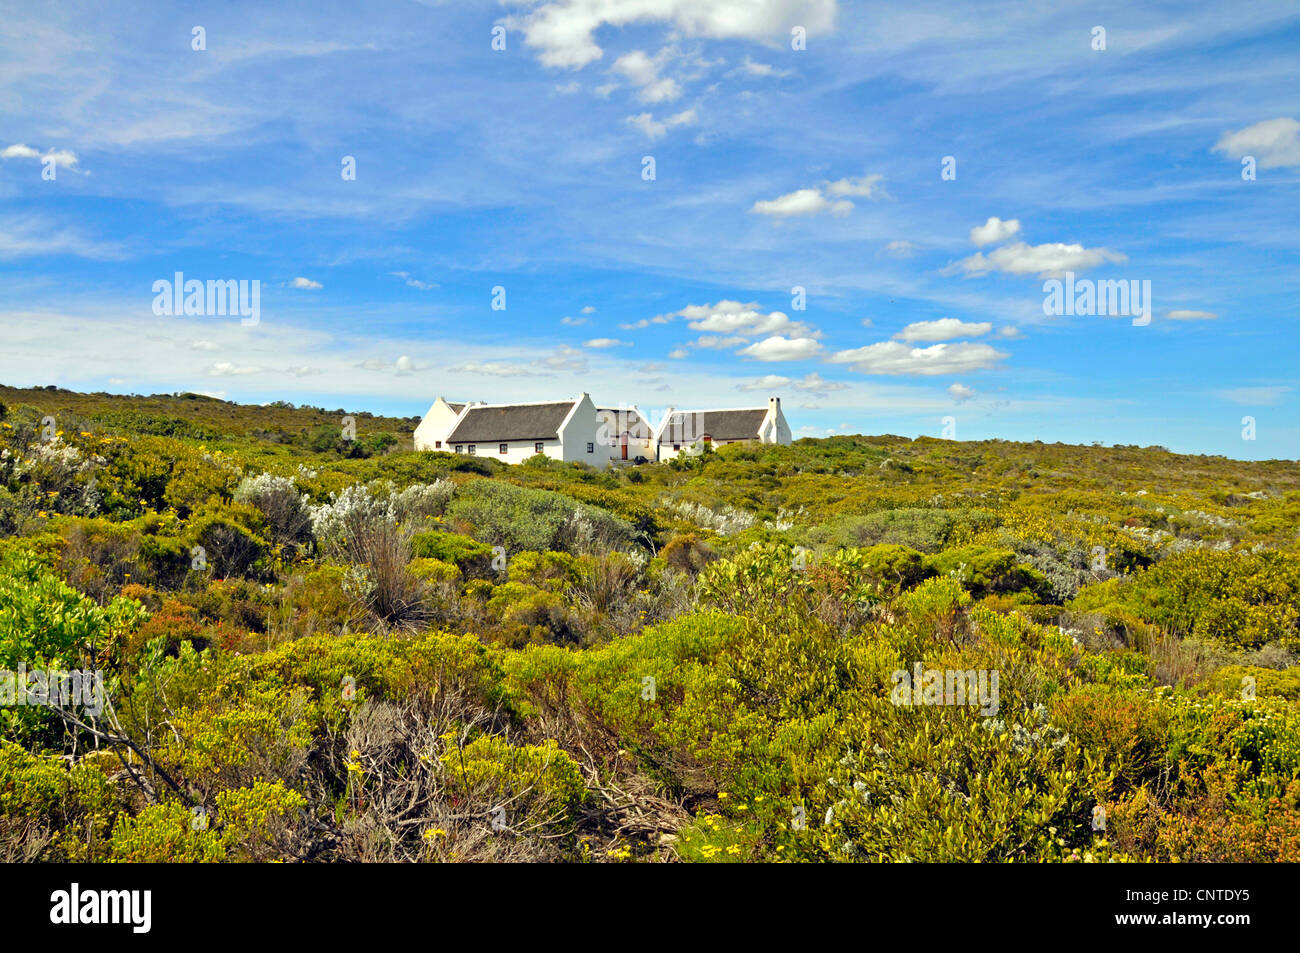 holiday bungalows in De Hoop Nature Reserve, South Africa, 1 Stock Photo